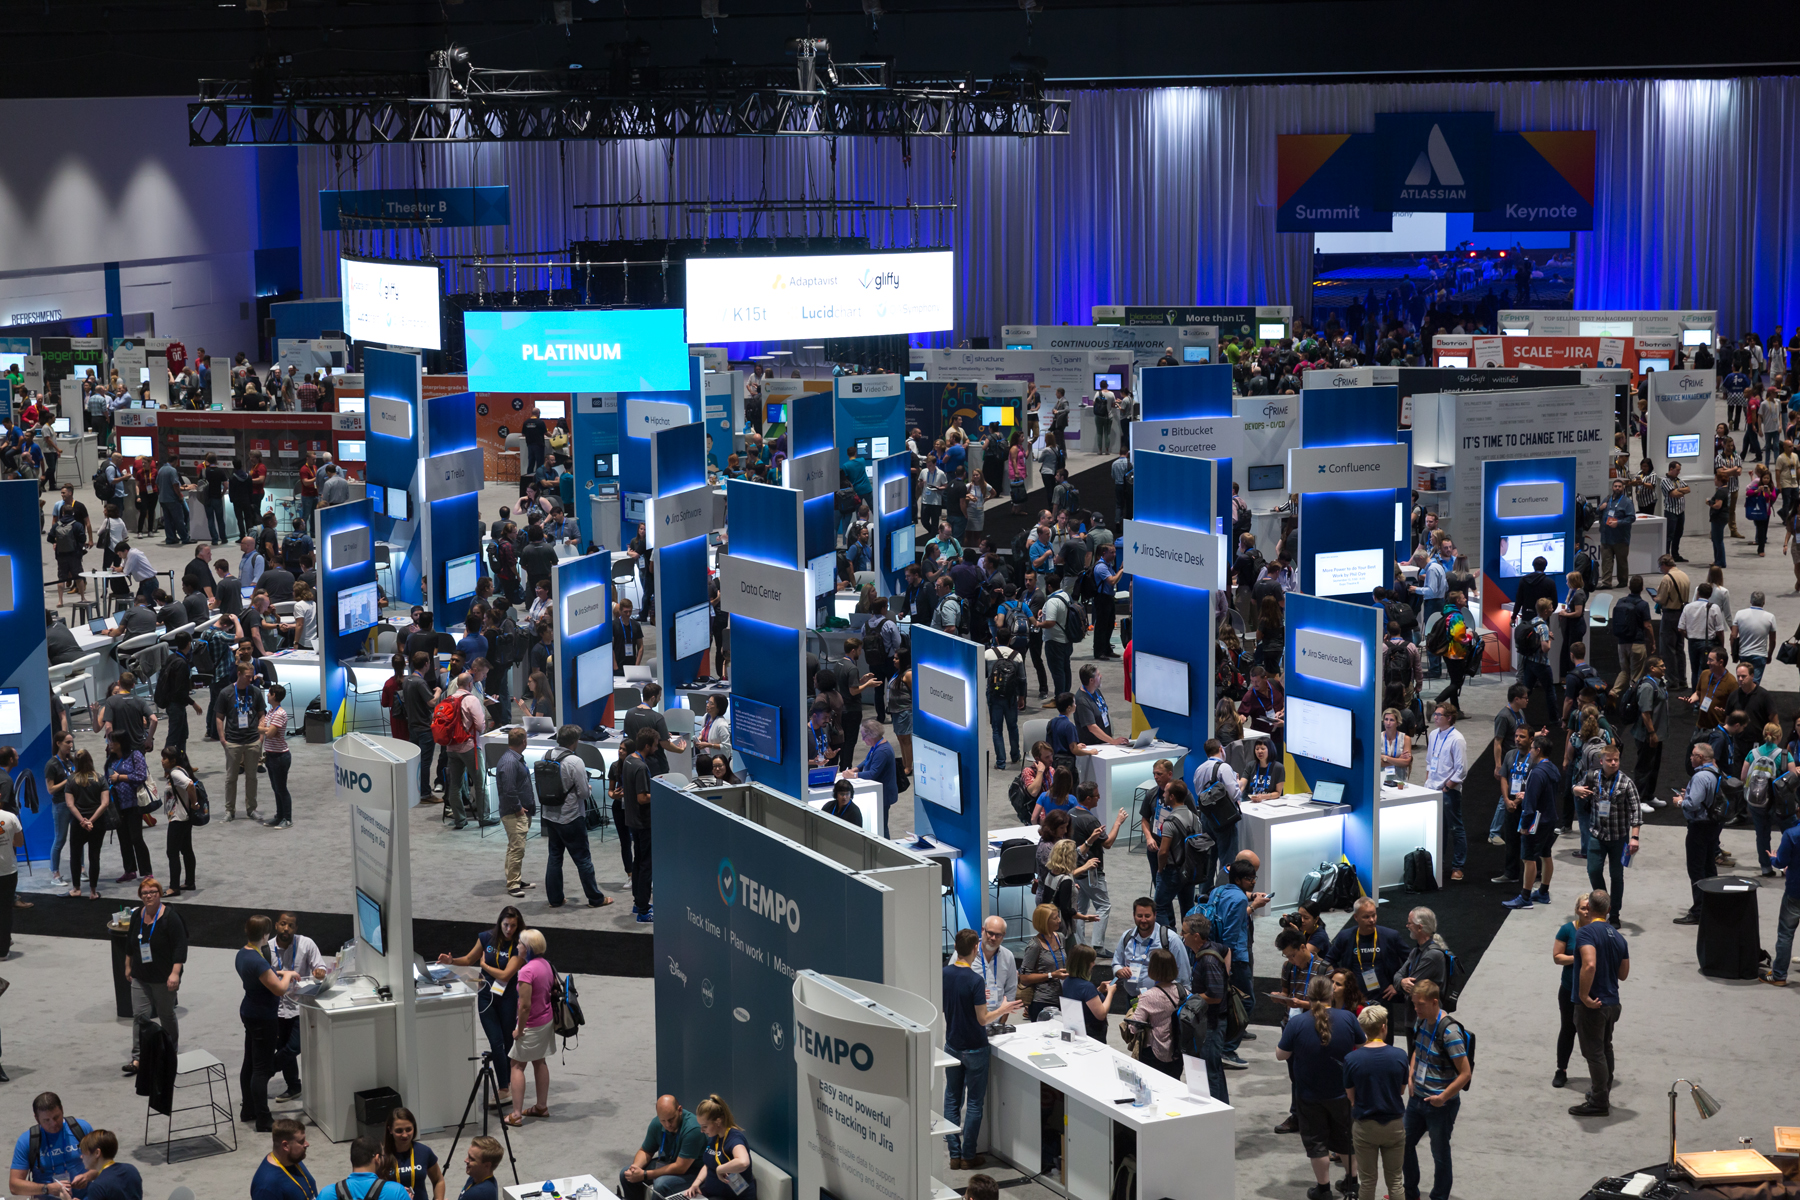 How to Get the Most out of Atlassian Summit